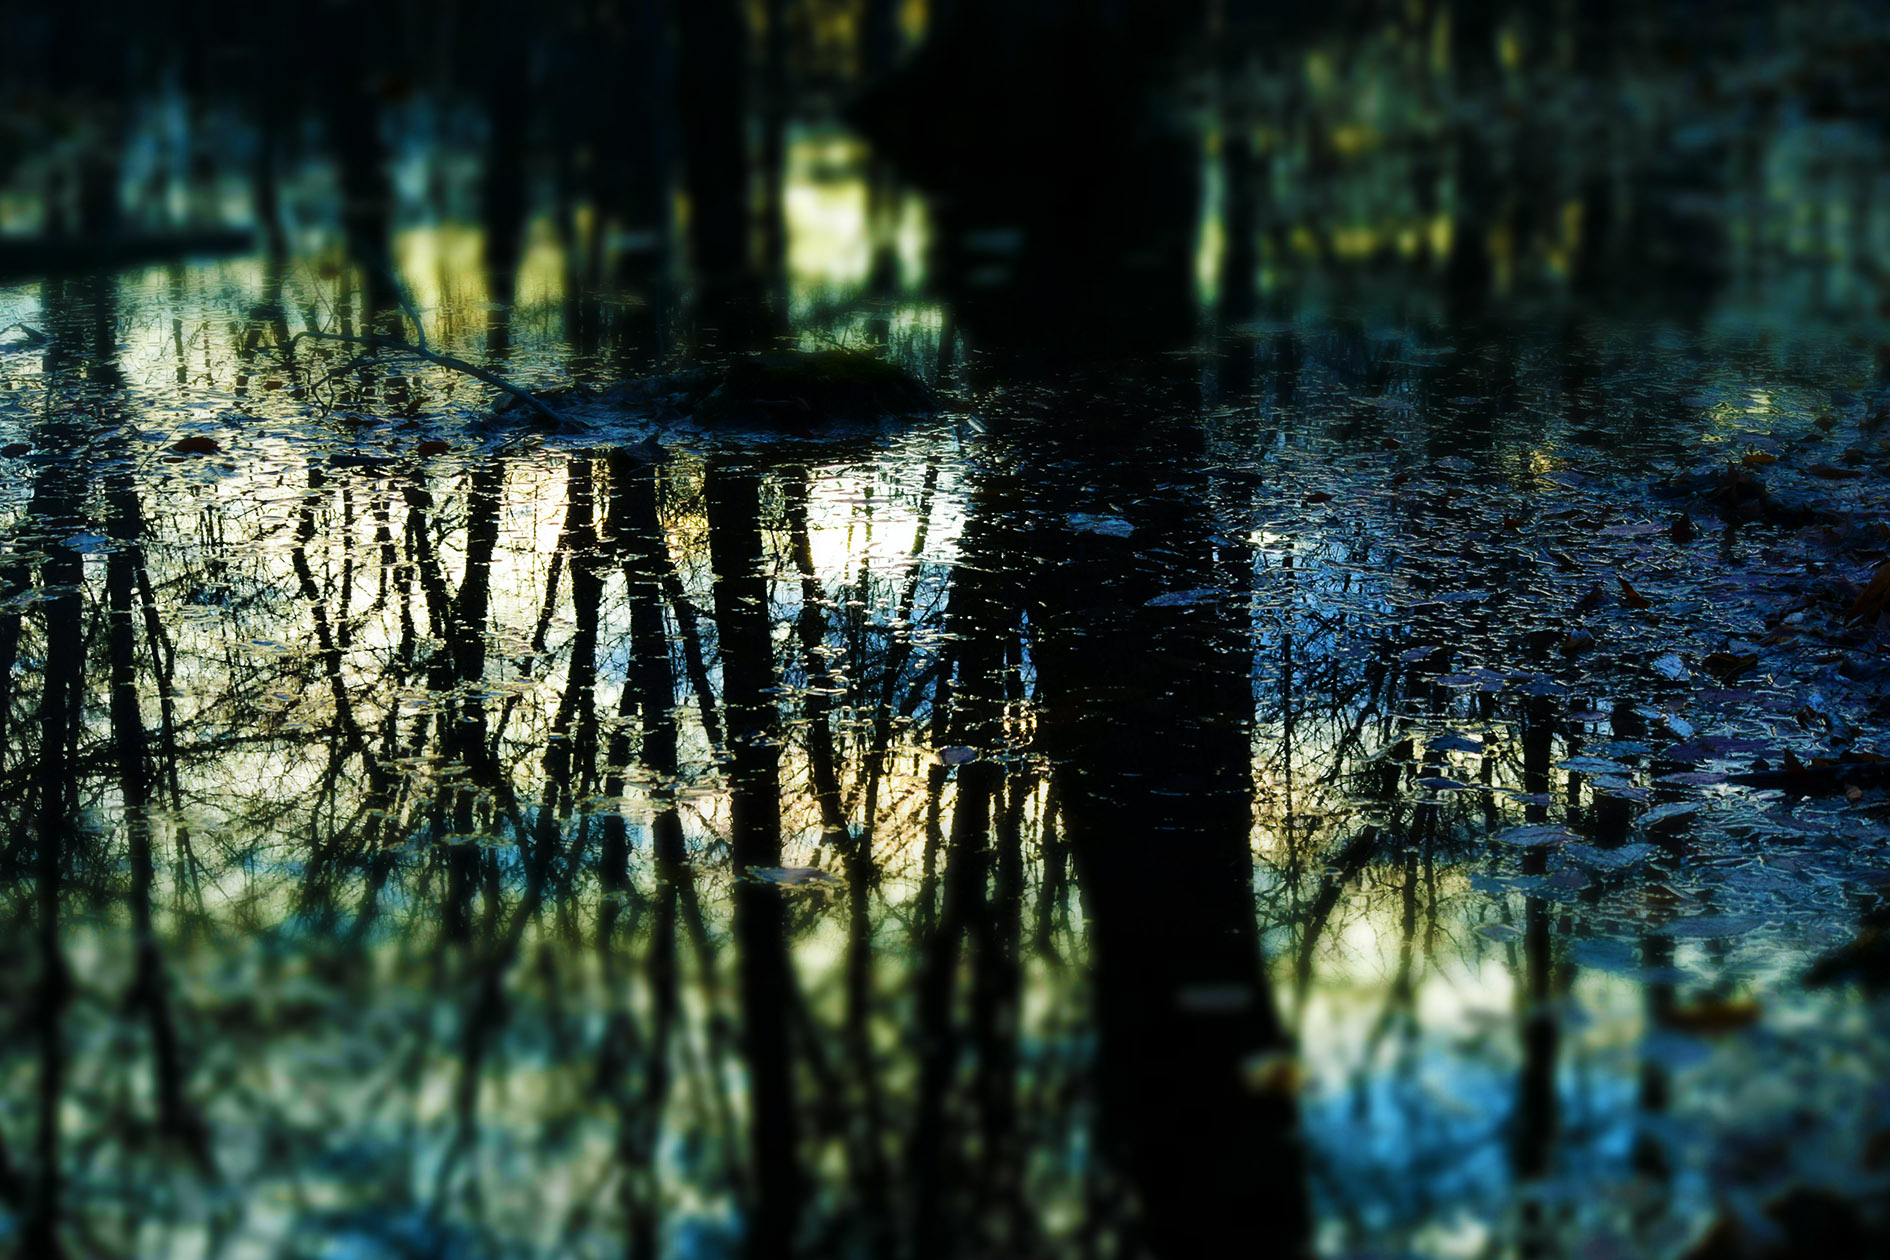 reflection of the branches and the tress on the water